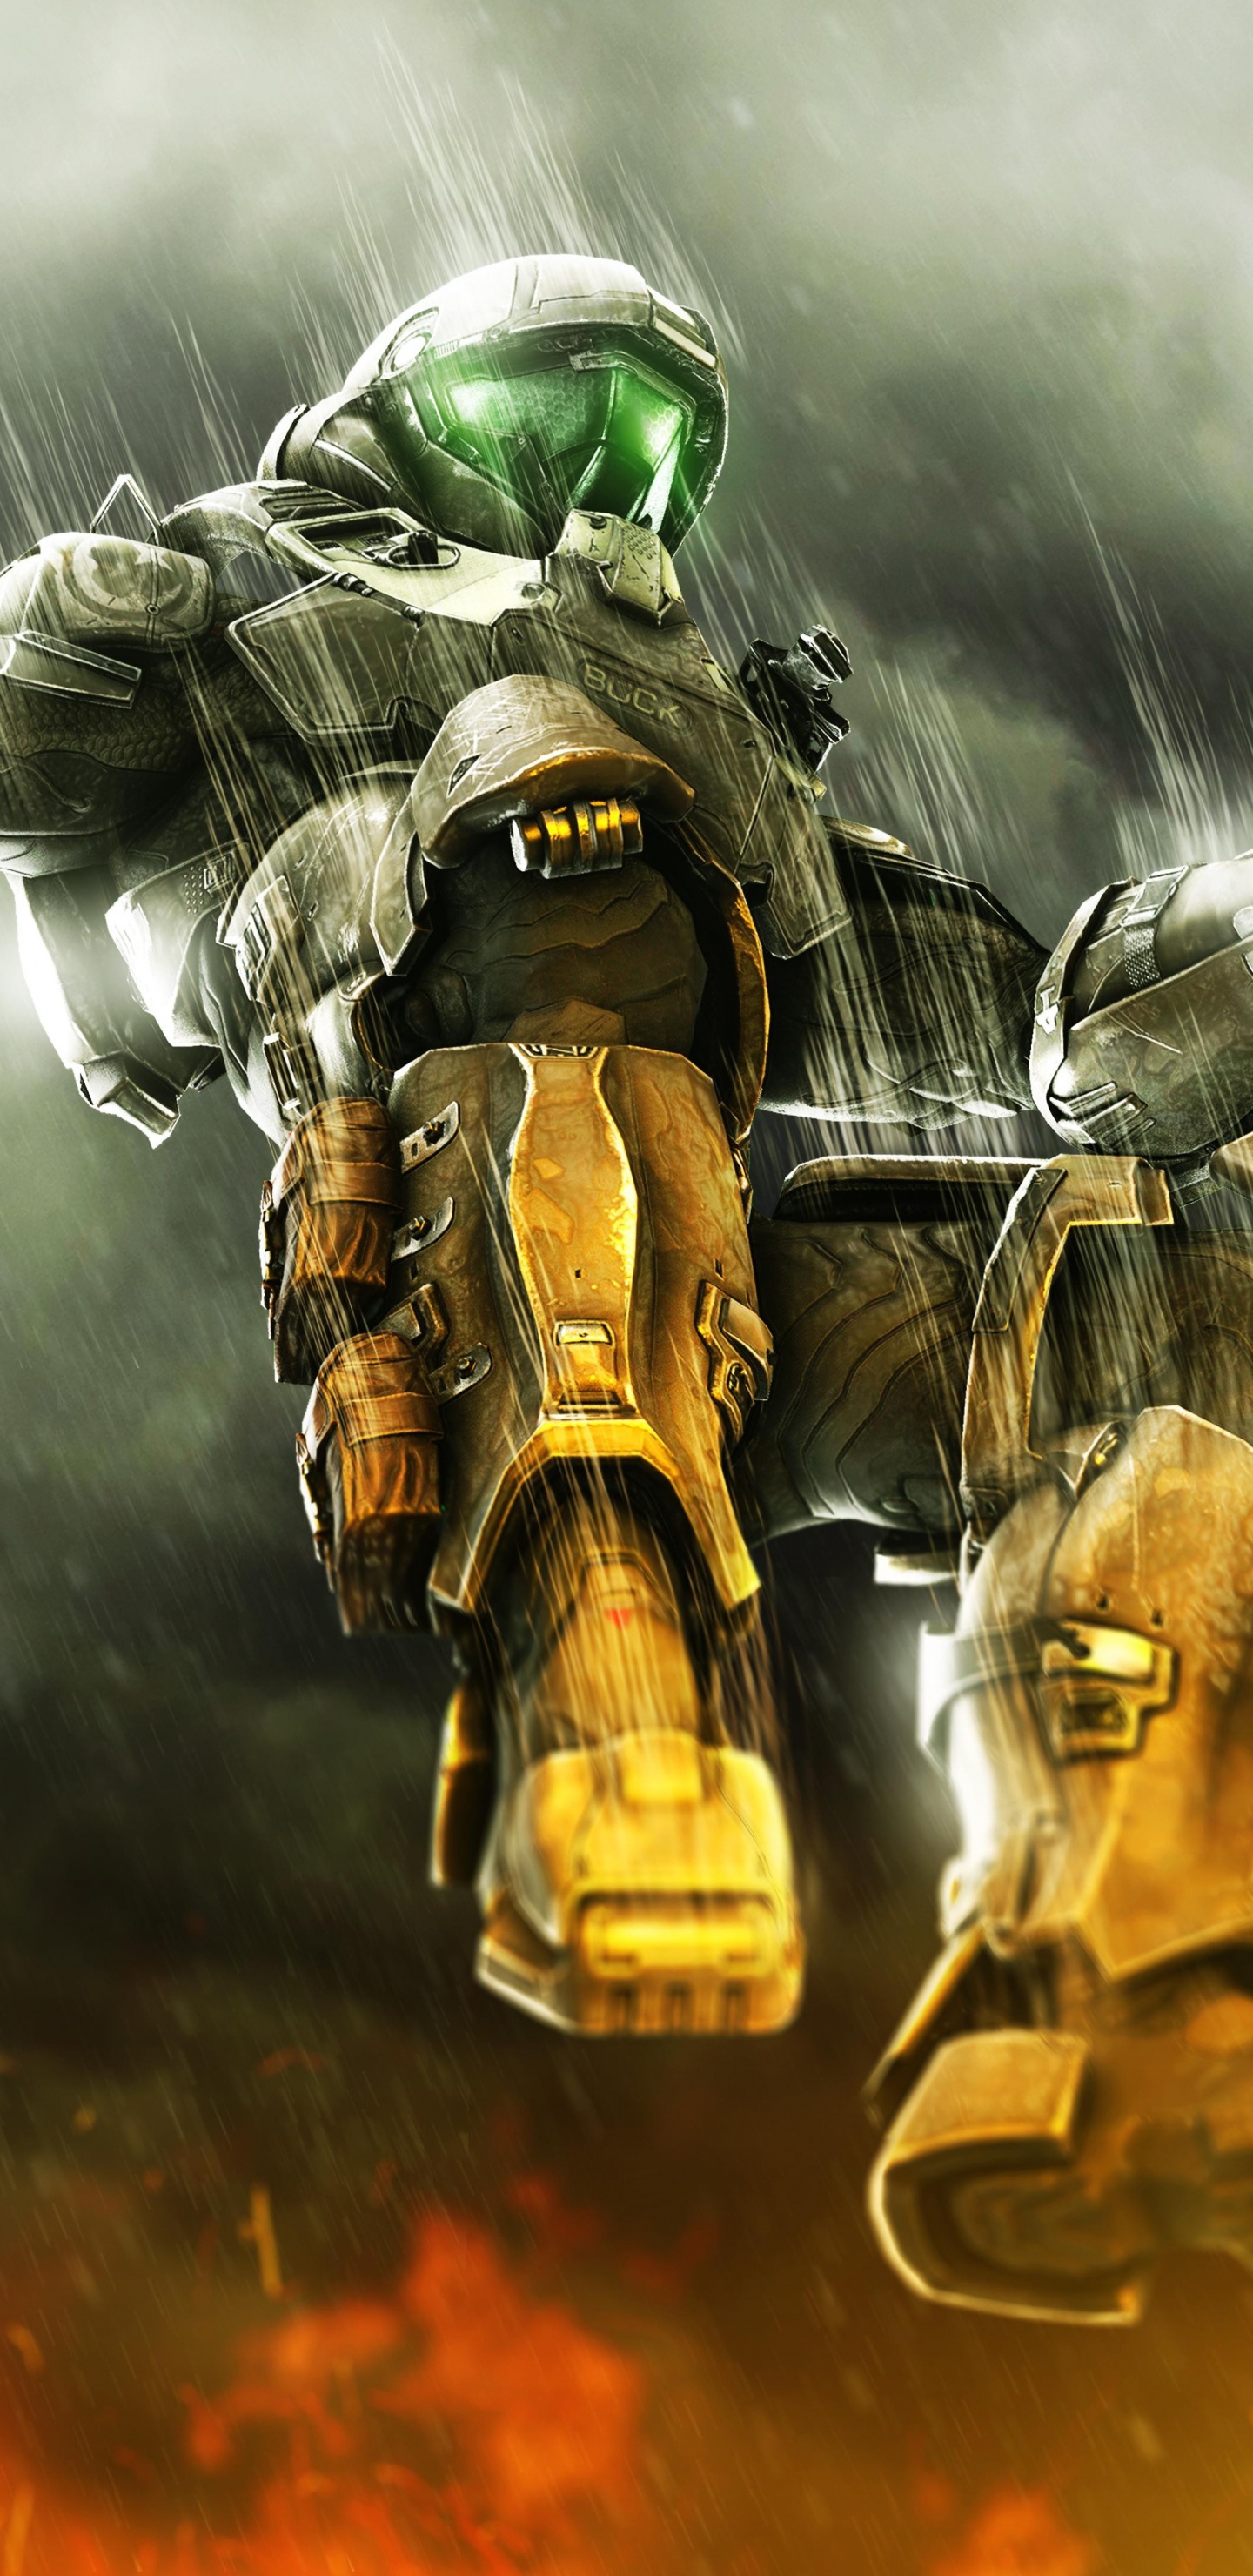 Halo 3, Master Chief, pc Game, Freestyle Motocross, Motocross. Wallpaper in 1440x2960 Resolution